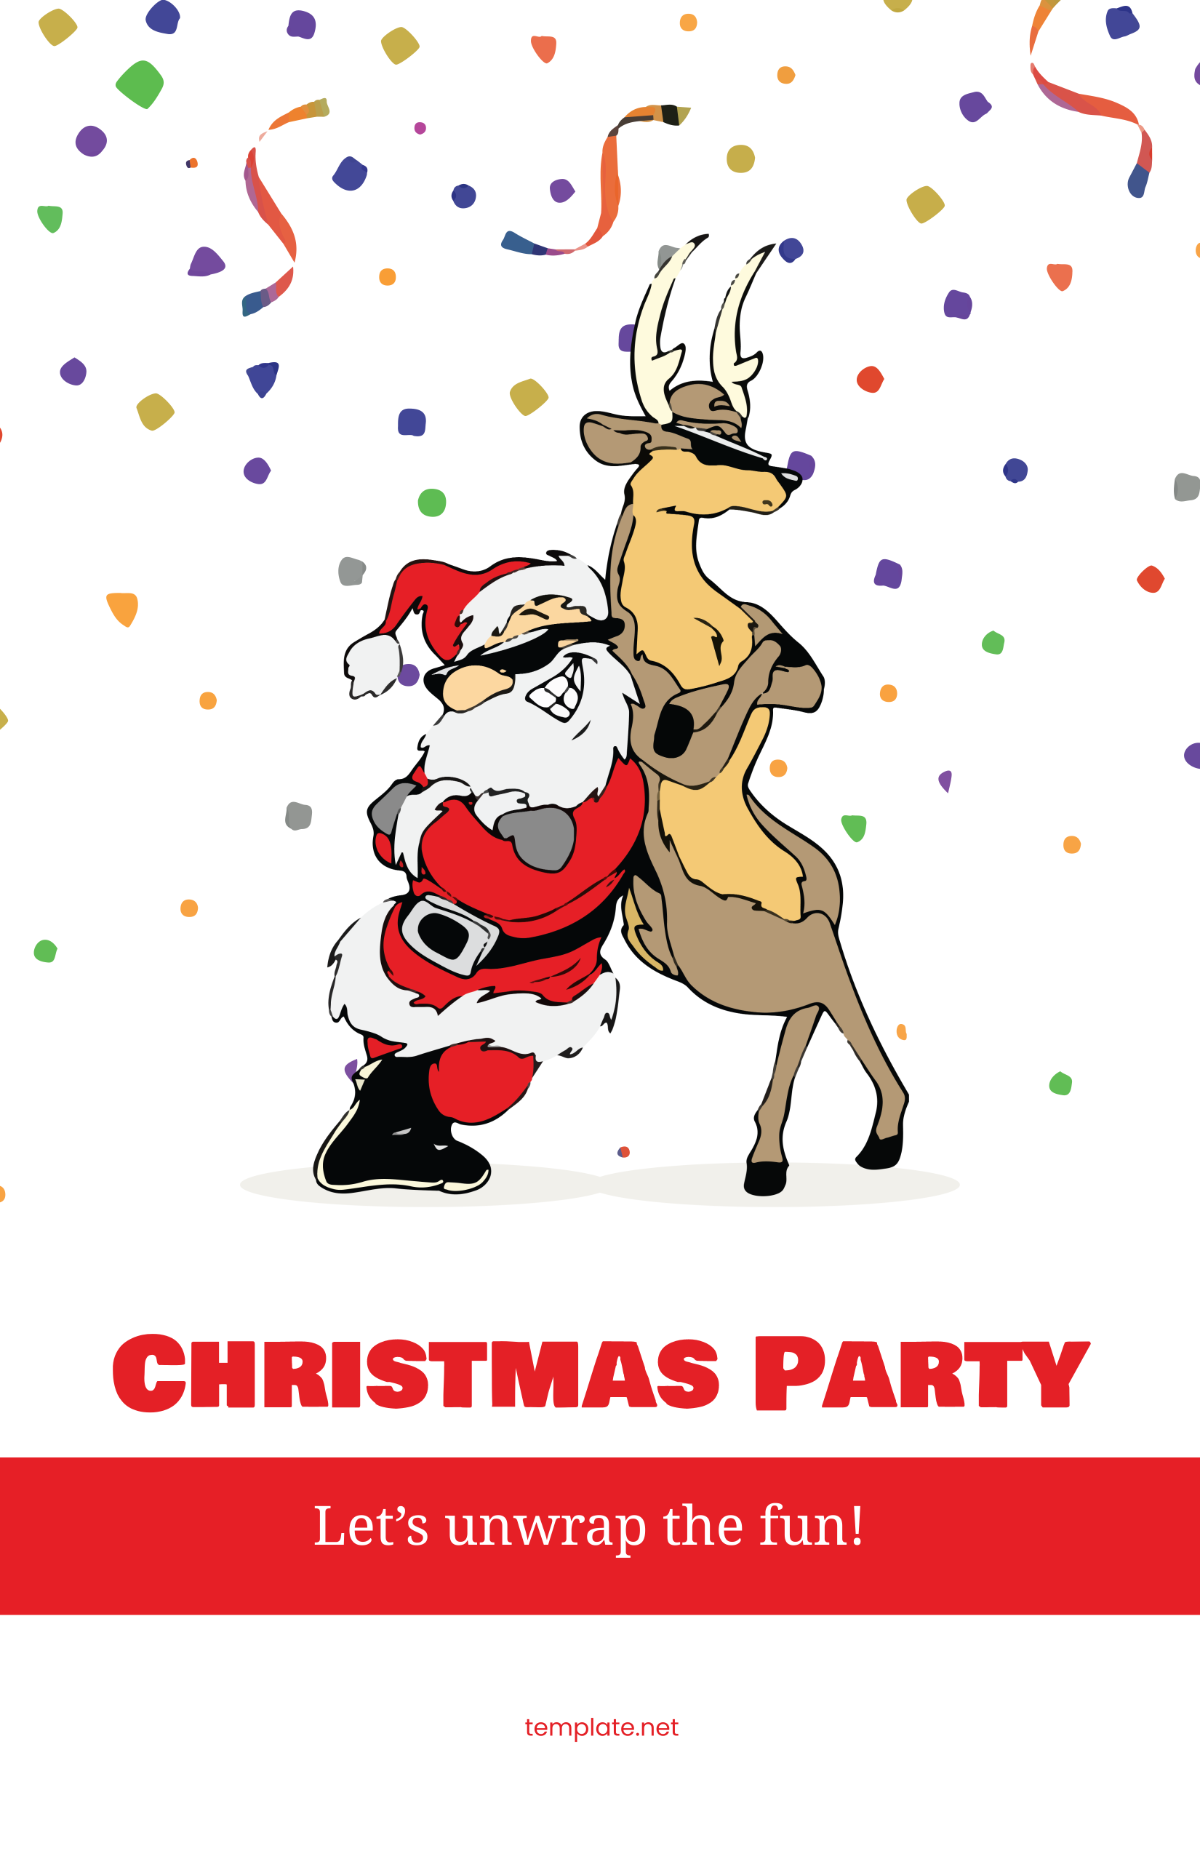 Christmas Party Invitation Poster Template